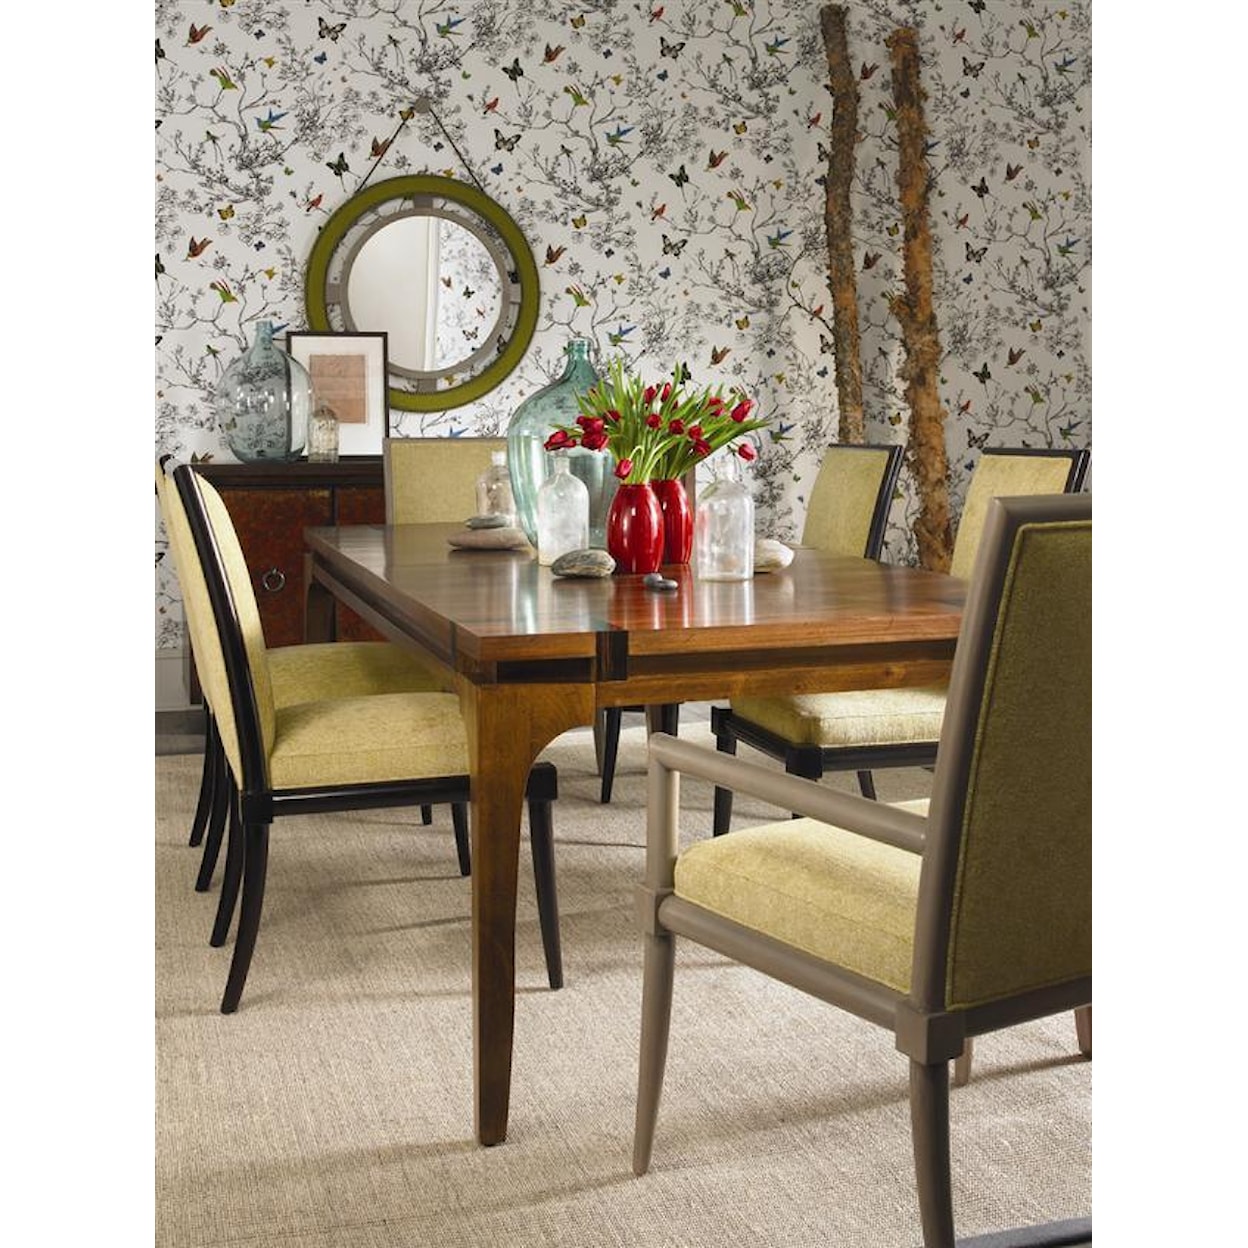 Vanguard Furniture Thom Filicia Home Collection Dining Table